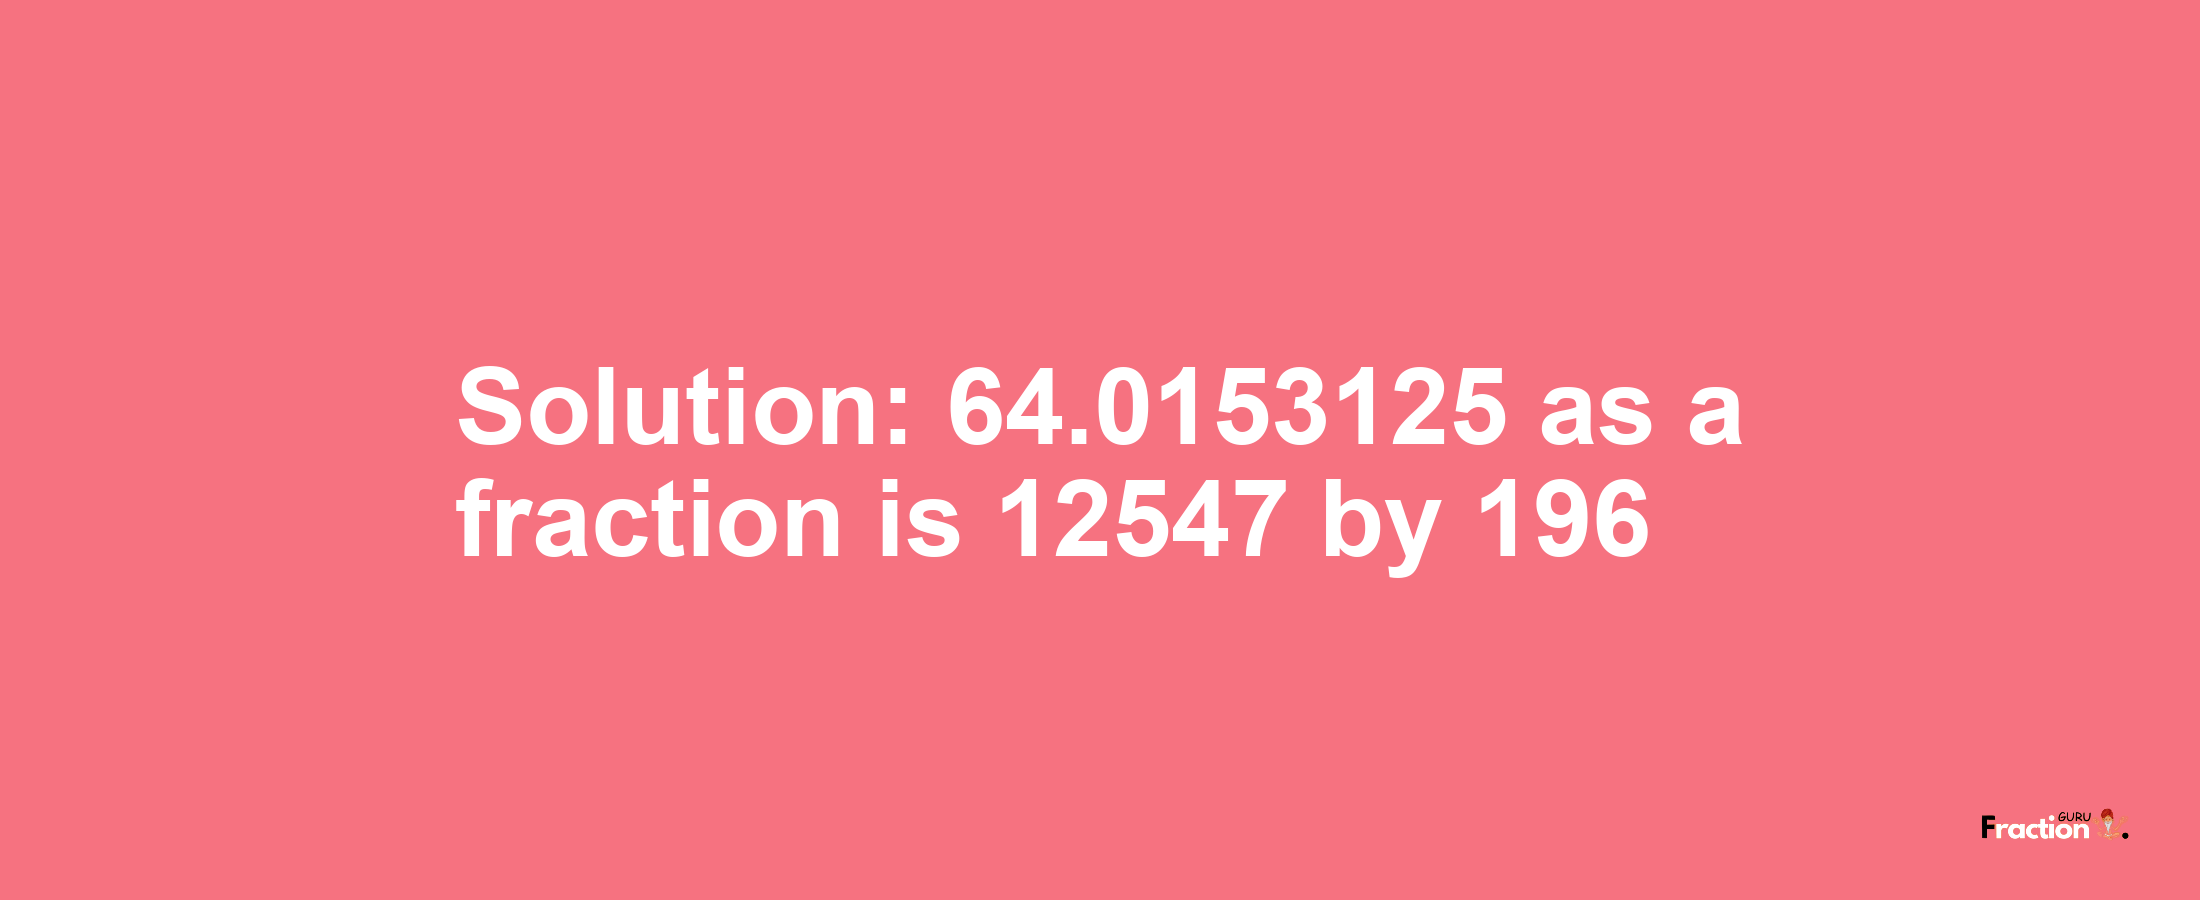 Solution:64.0153125 as a fraction is 12547/196